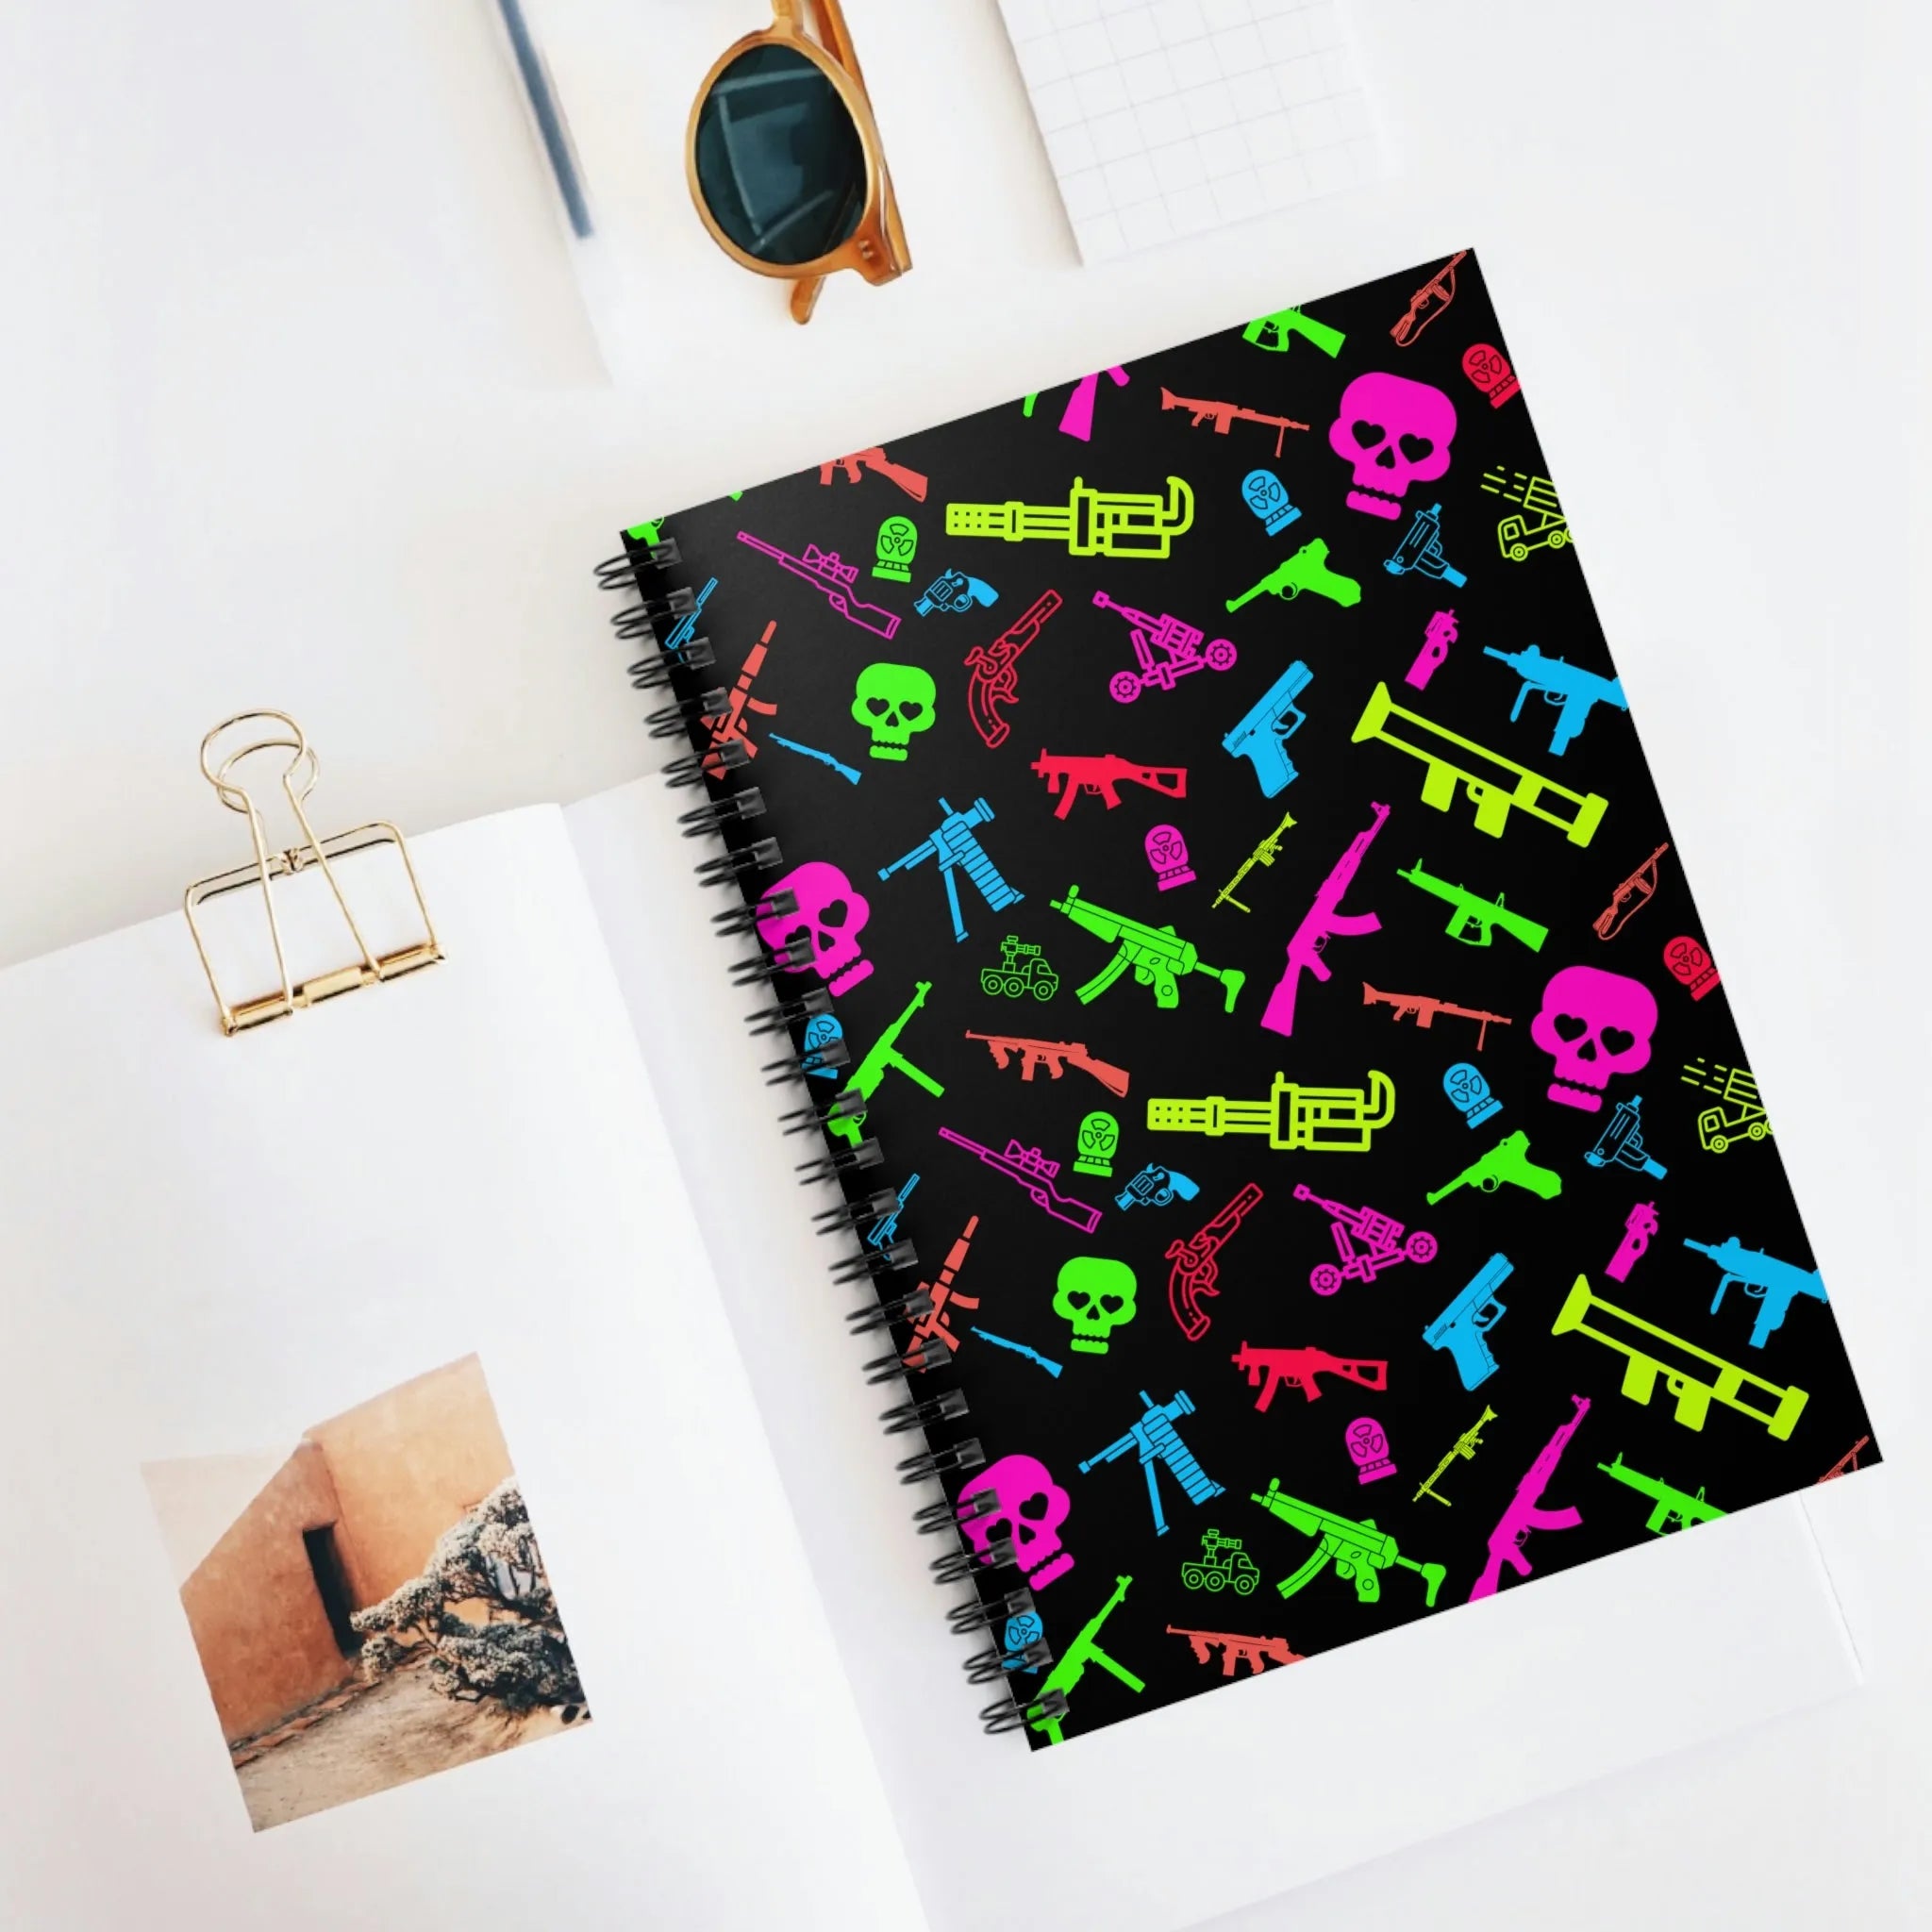 Retro Neon Firearms Spiral Notebook - Ruled Line